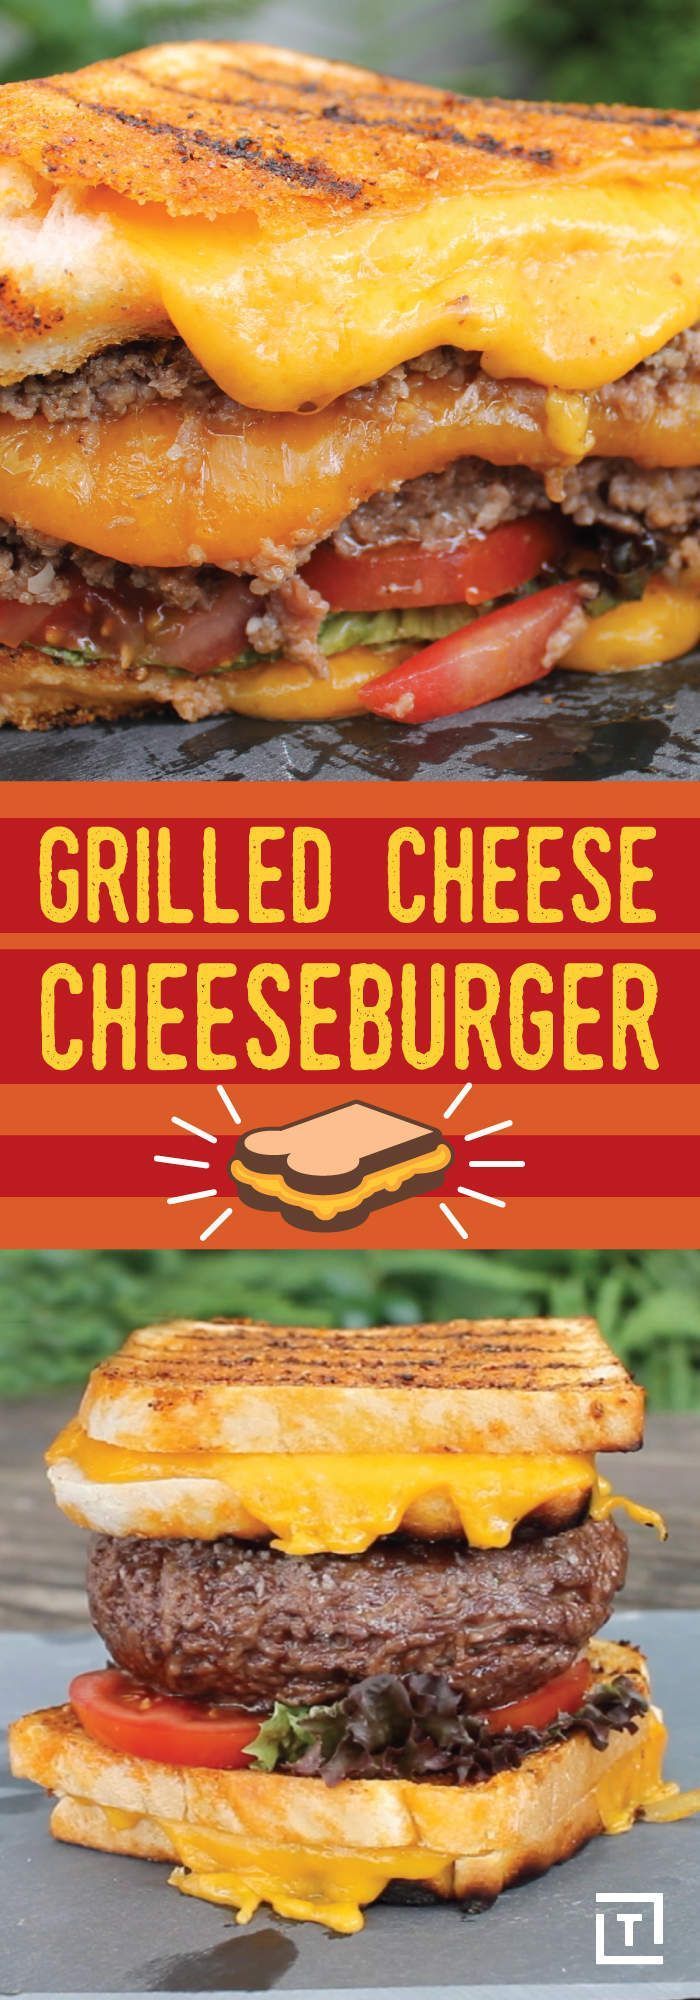 Grilled Cheese Cheeseburger -   14 grilled sandwich recipes
 ideas